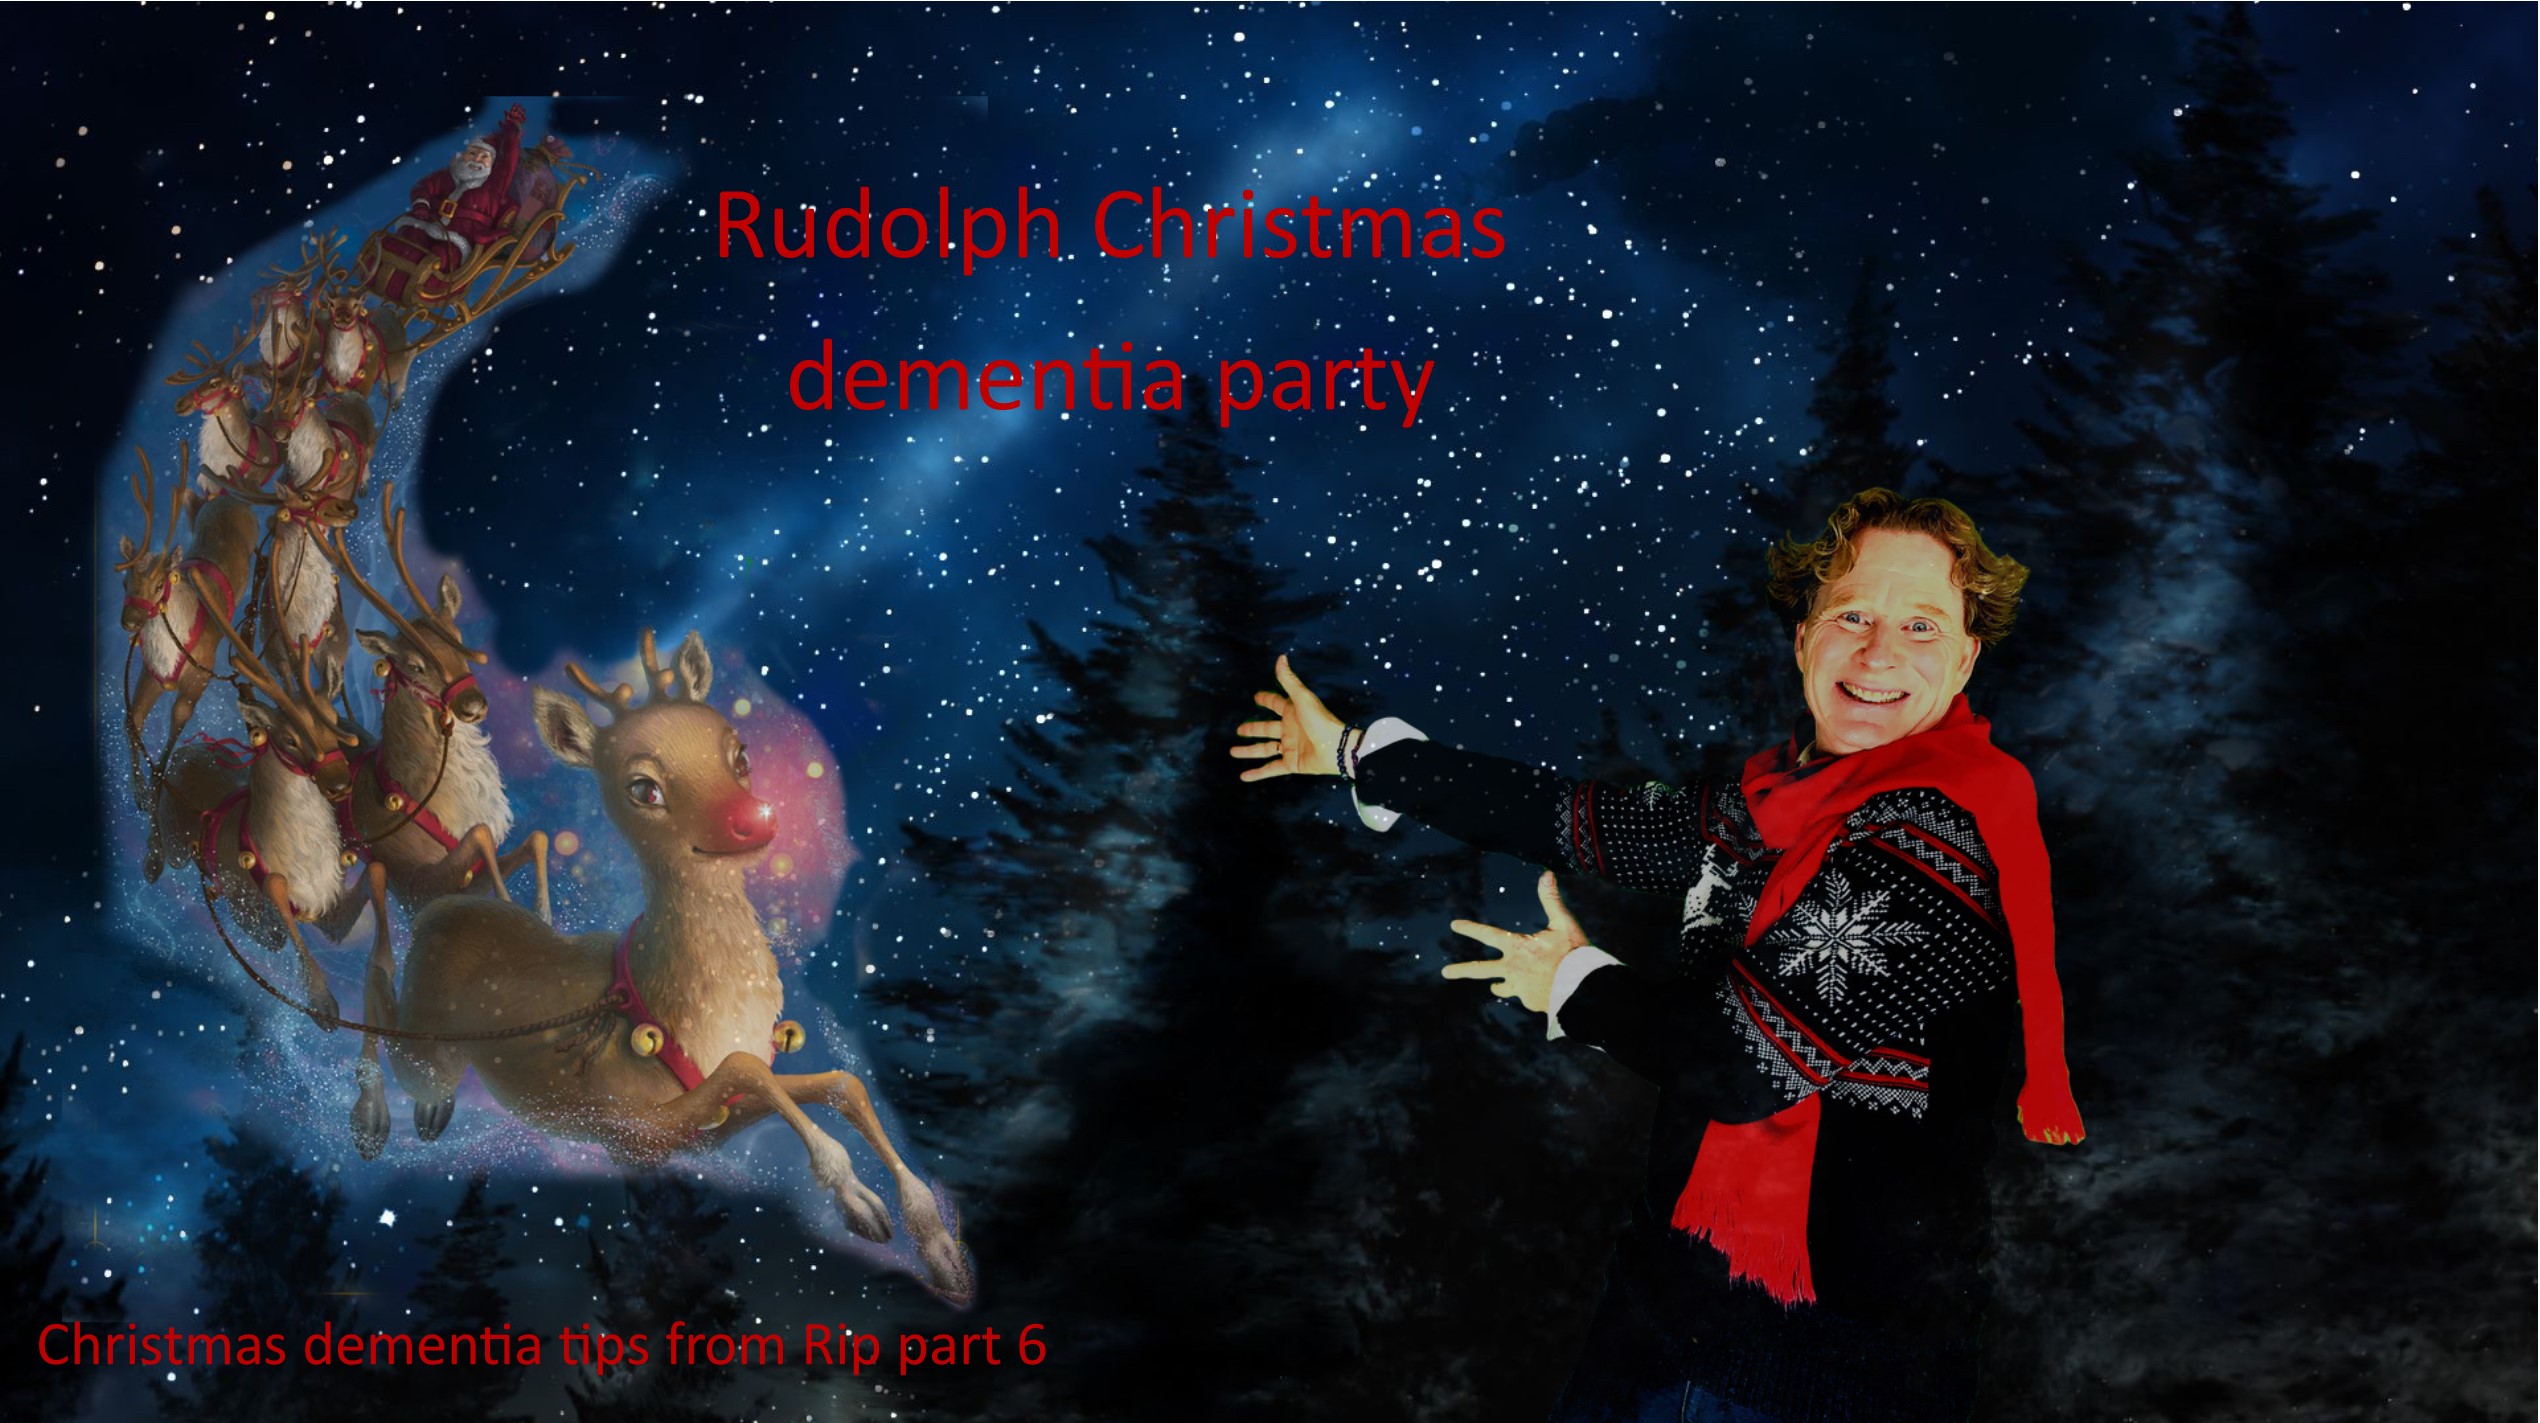 Rudolph dementia Christmas party featured image